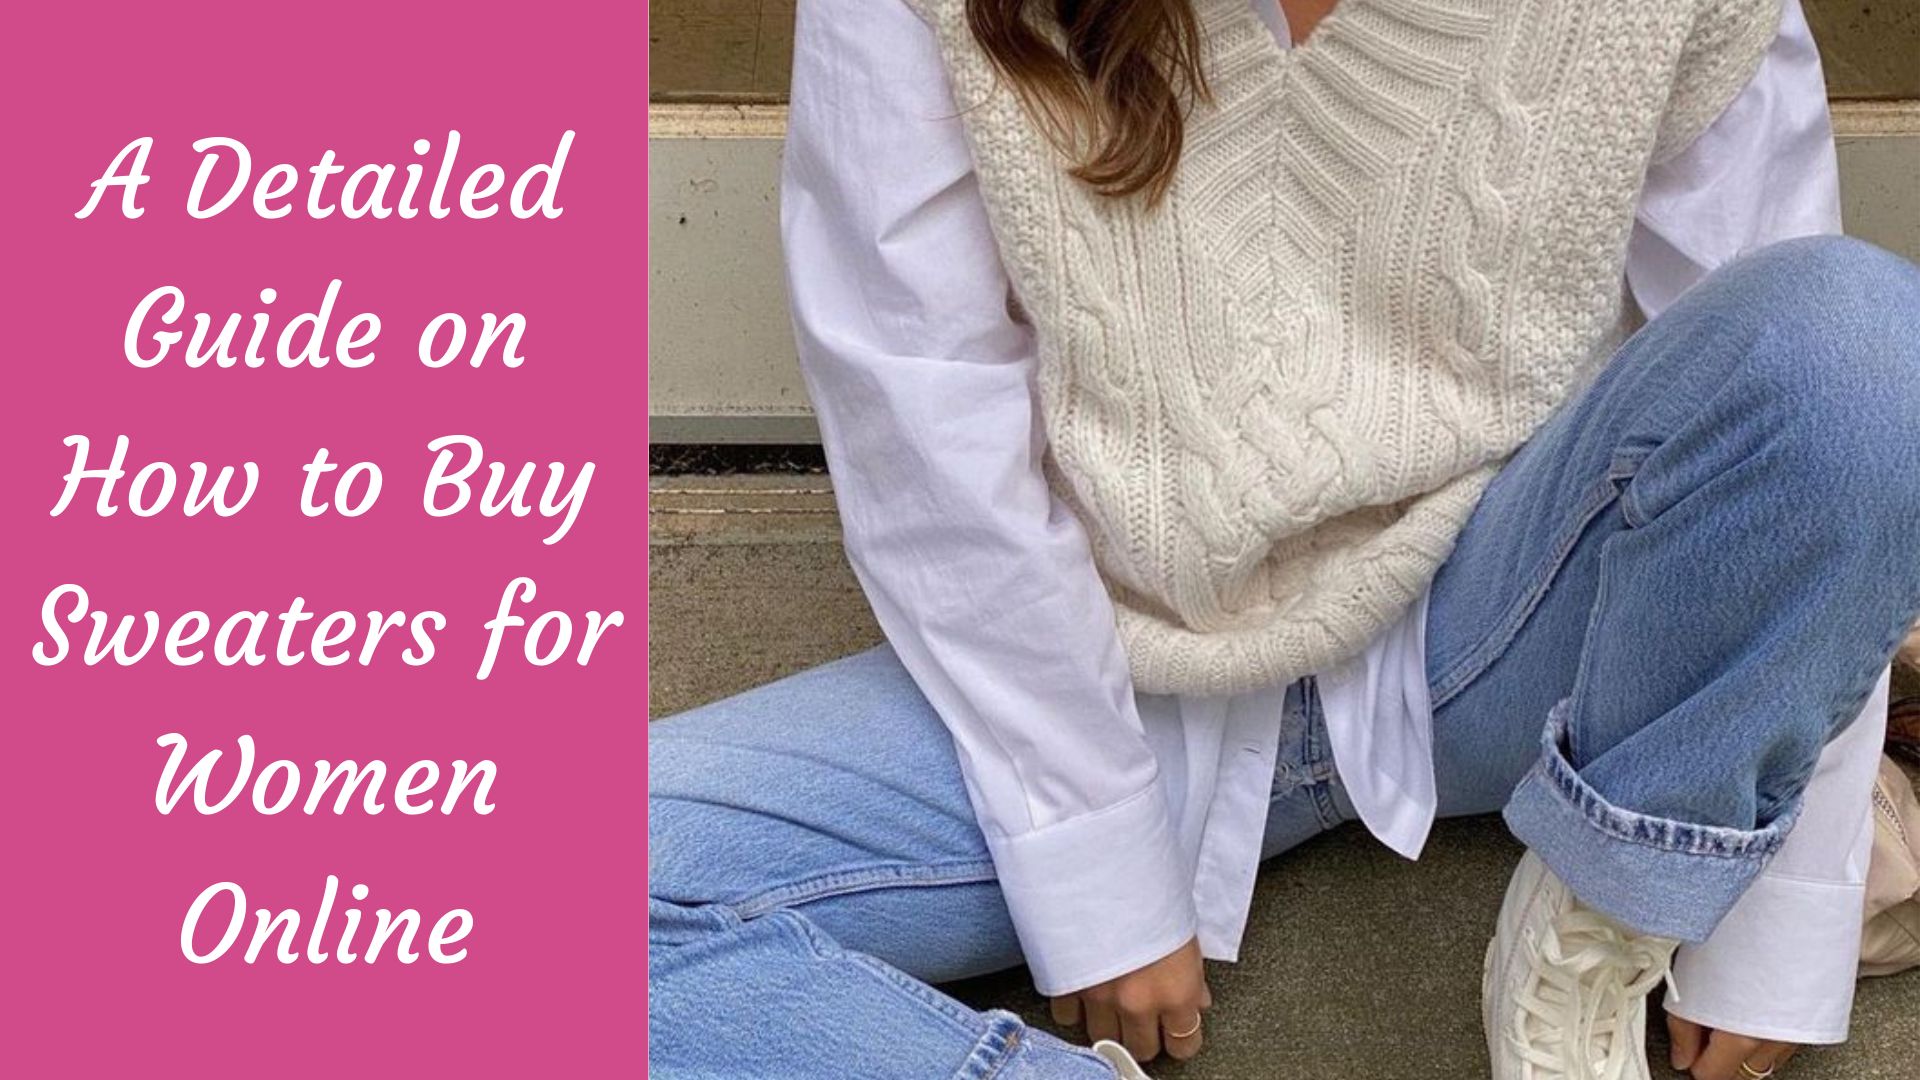 A Detailed Guide on How to Buy Sweaters for Women Online